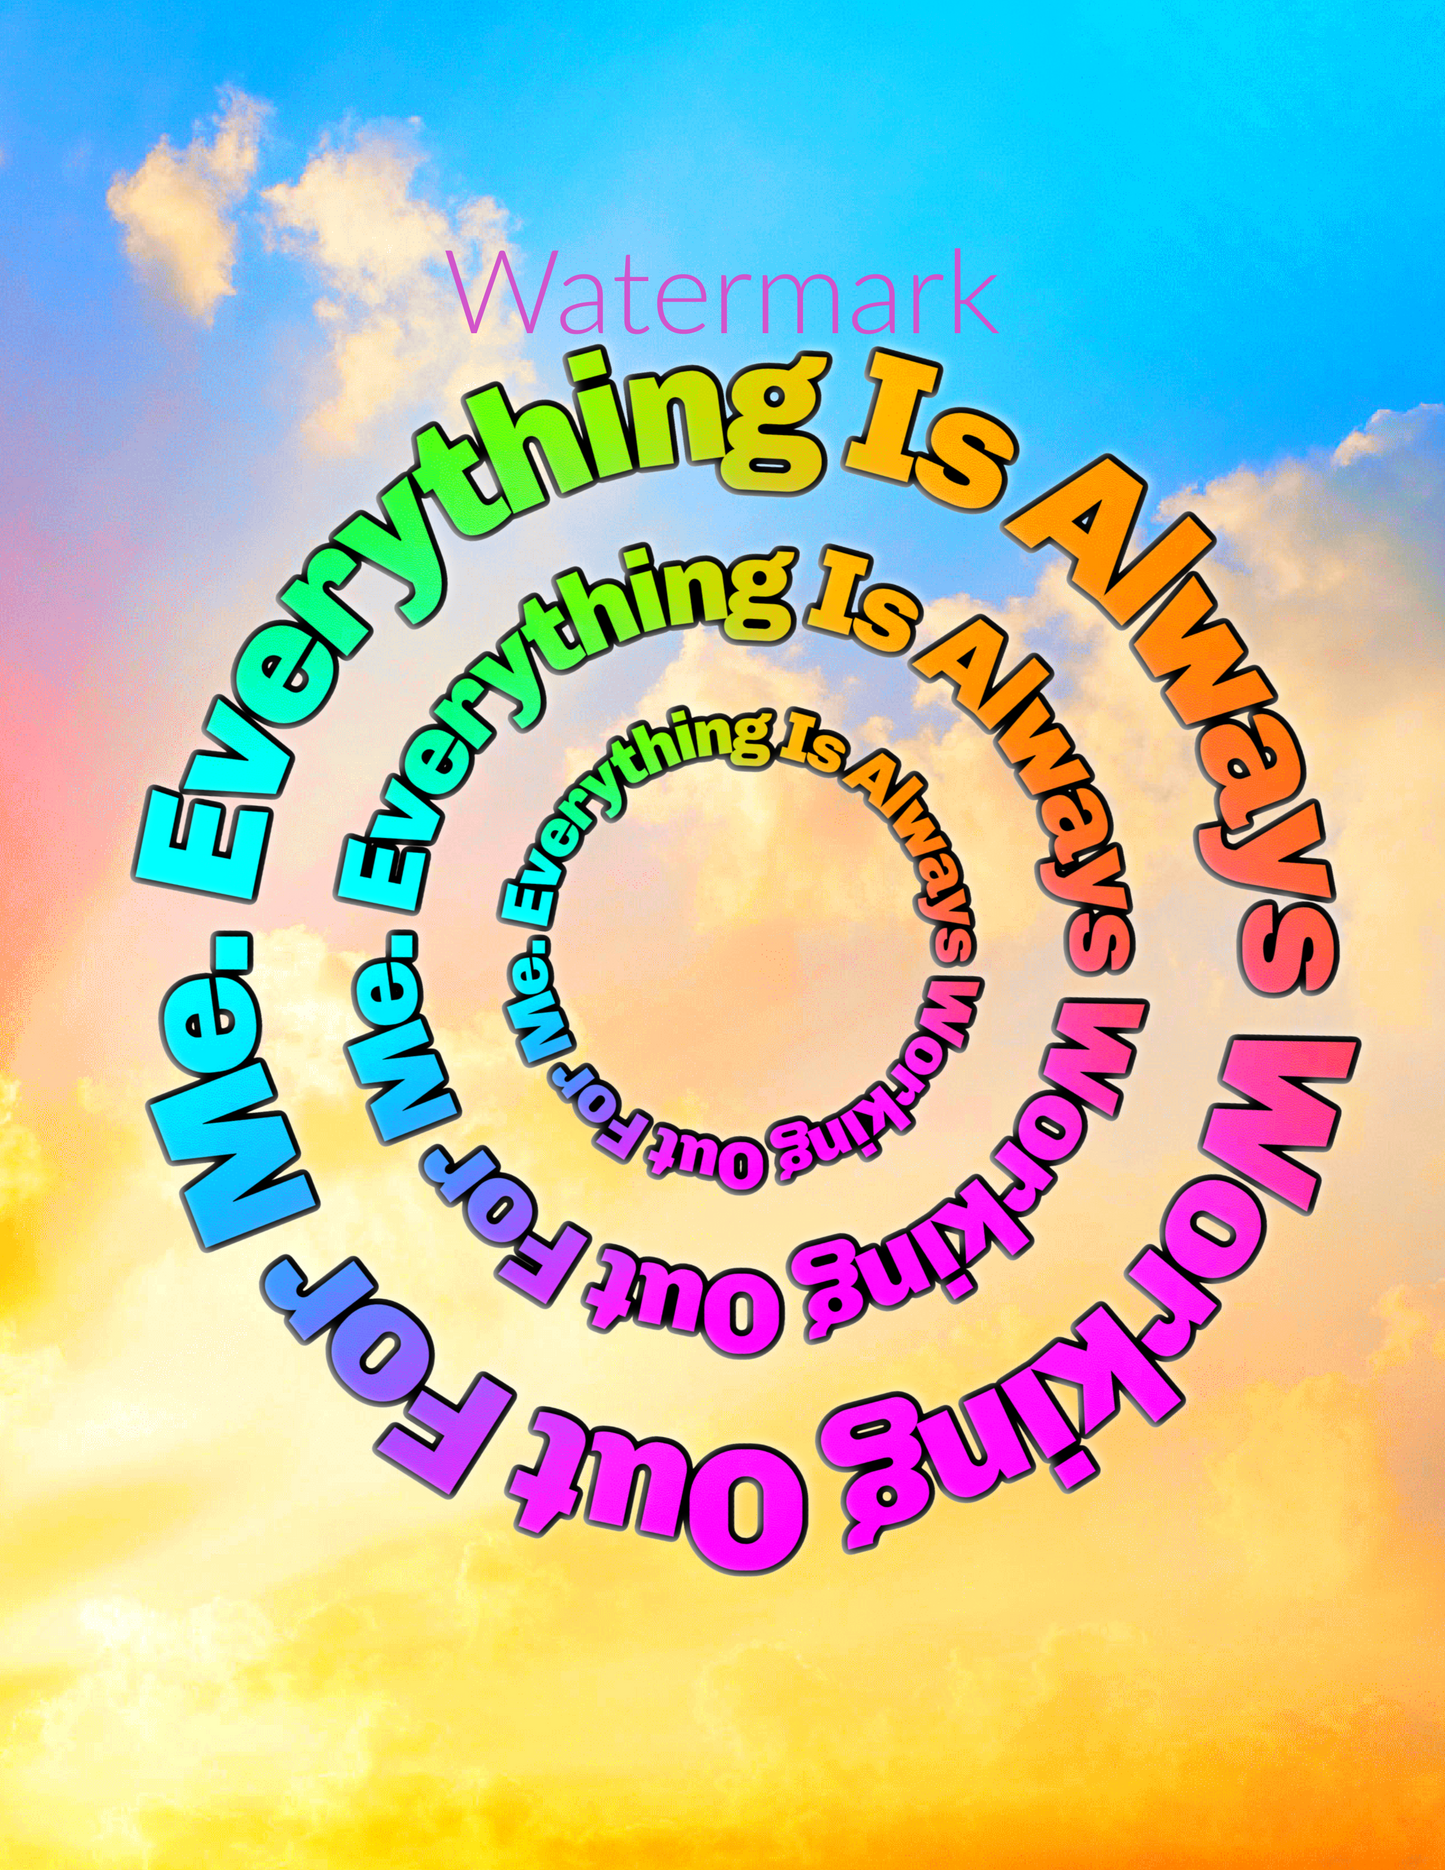 Everything Is Always Working Out For Me. Law Of Attraction Quote From Abraham Hicks - Wall Art